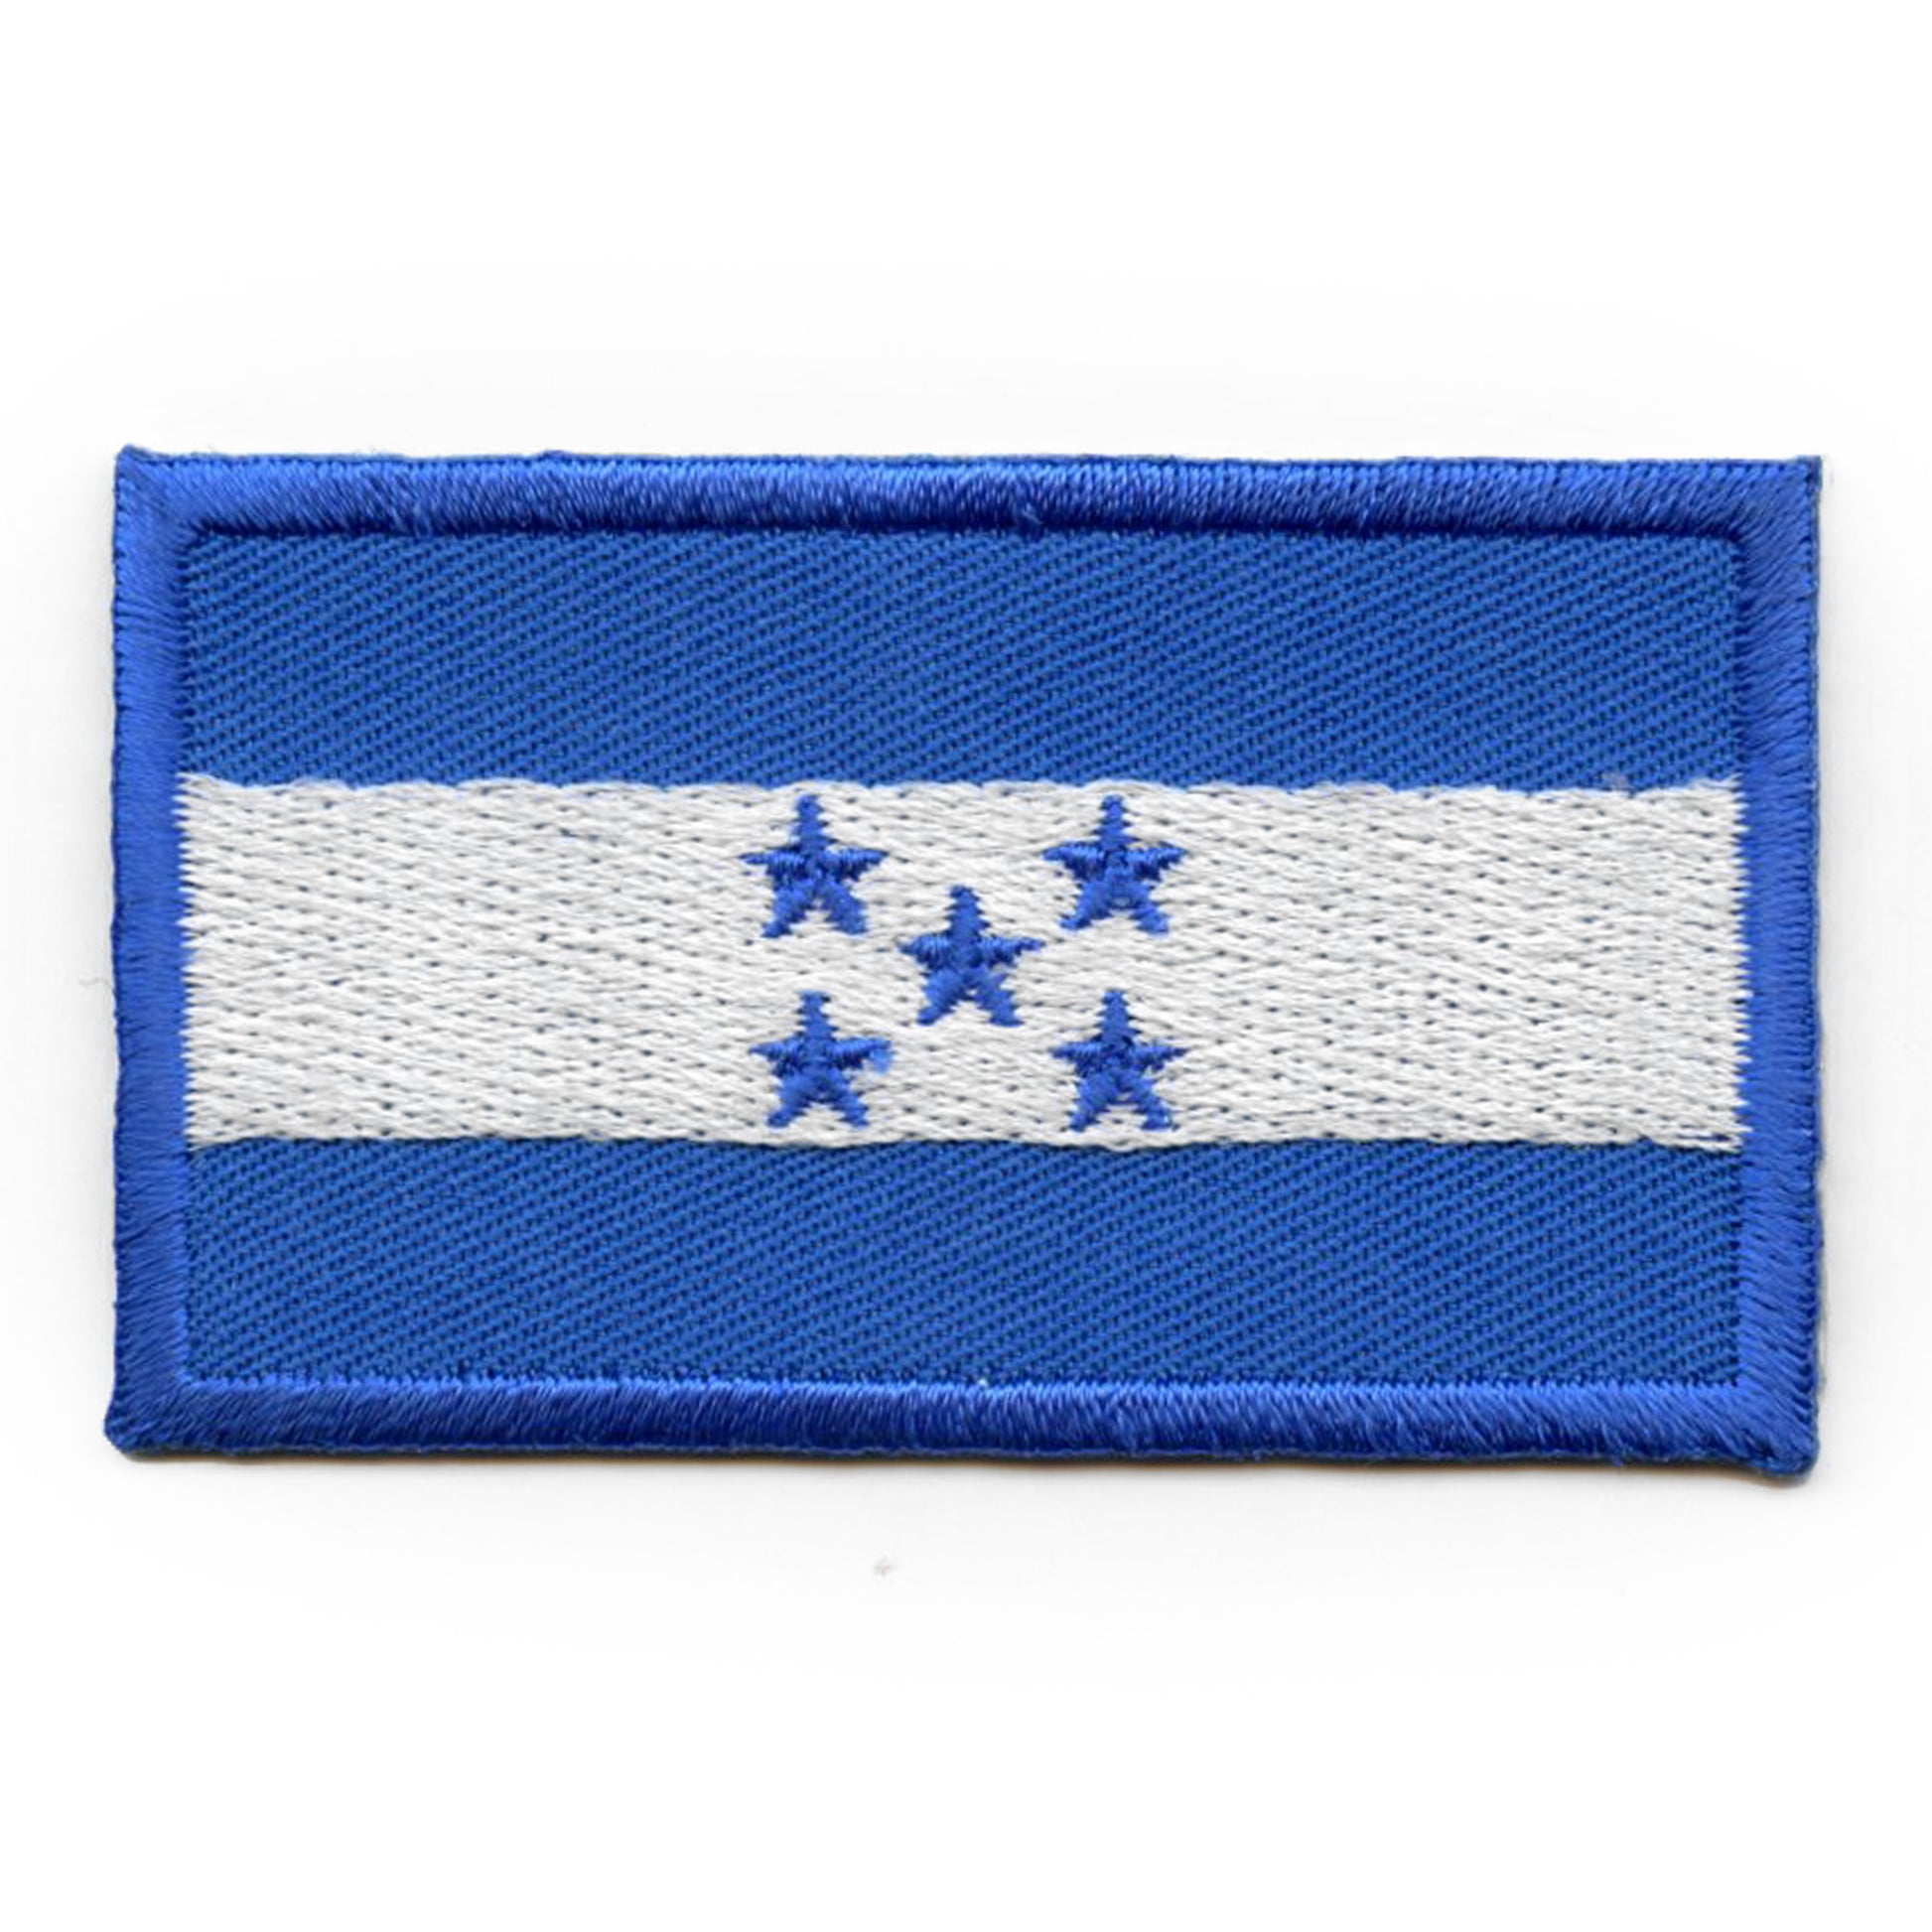 Small Honduras Flag Patch Hispanic Central America Catracho Embroidered Iron on